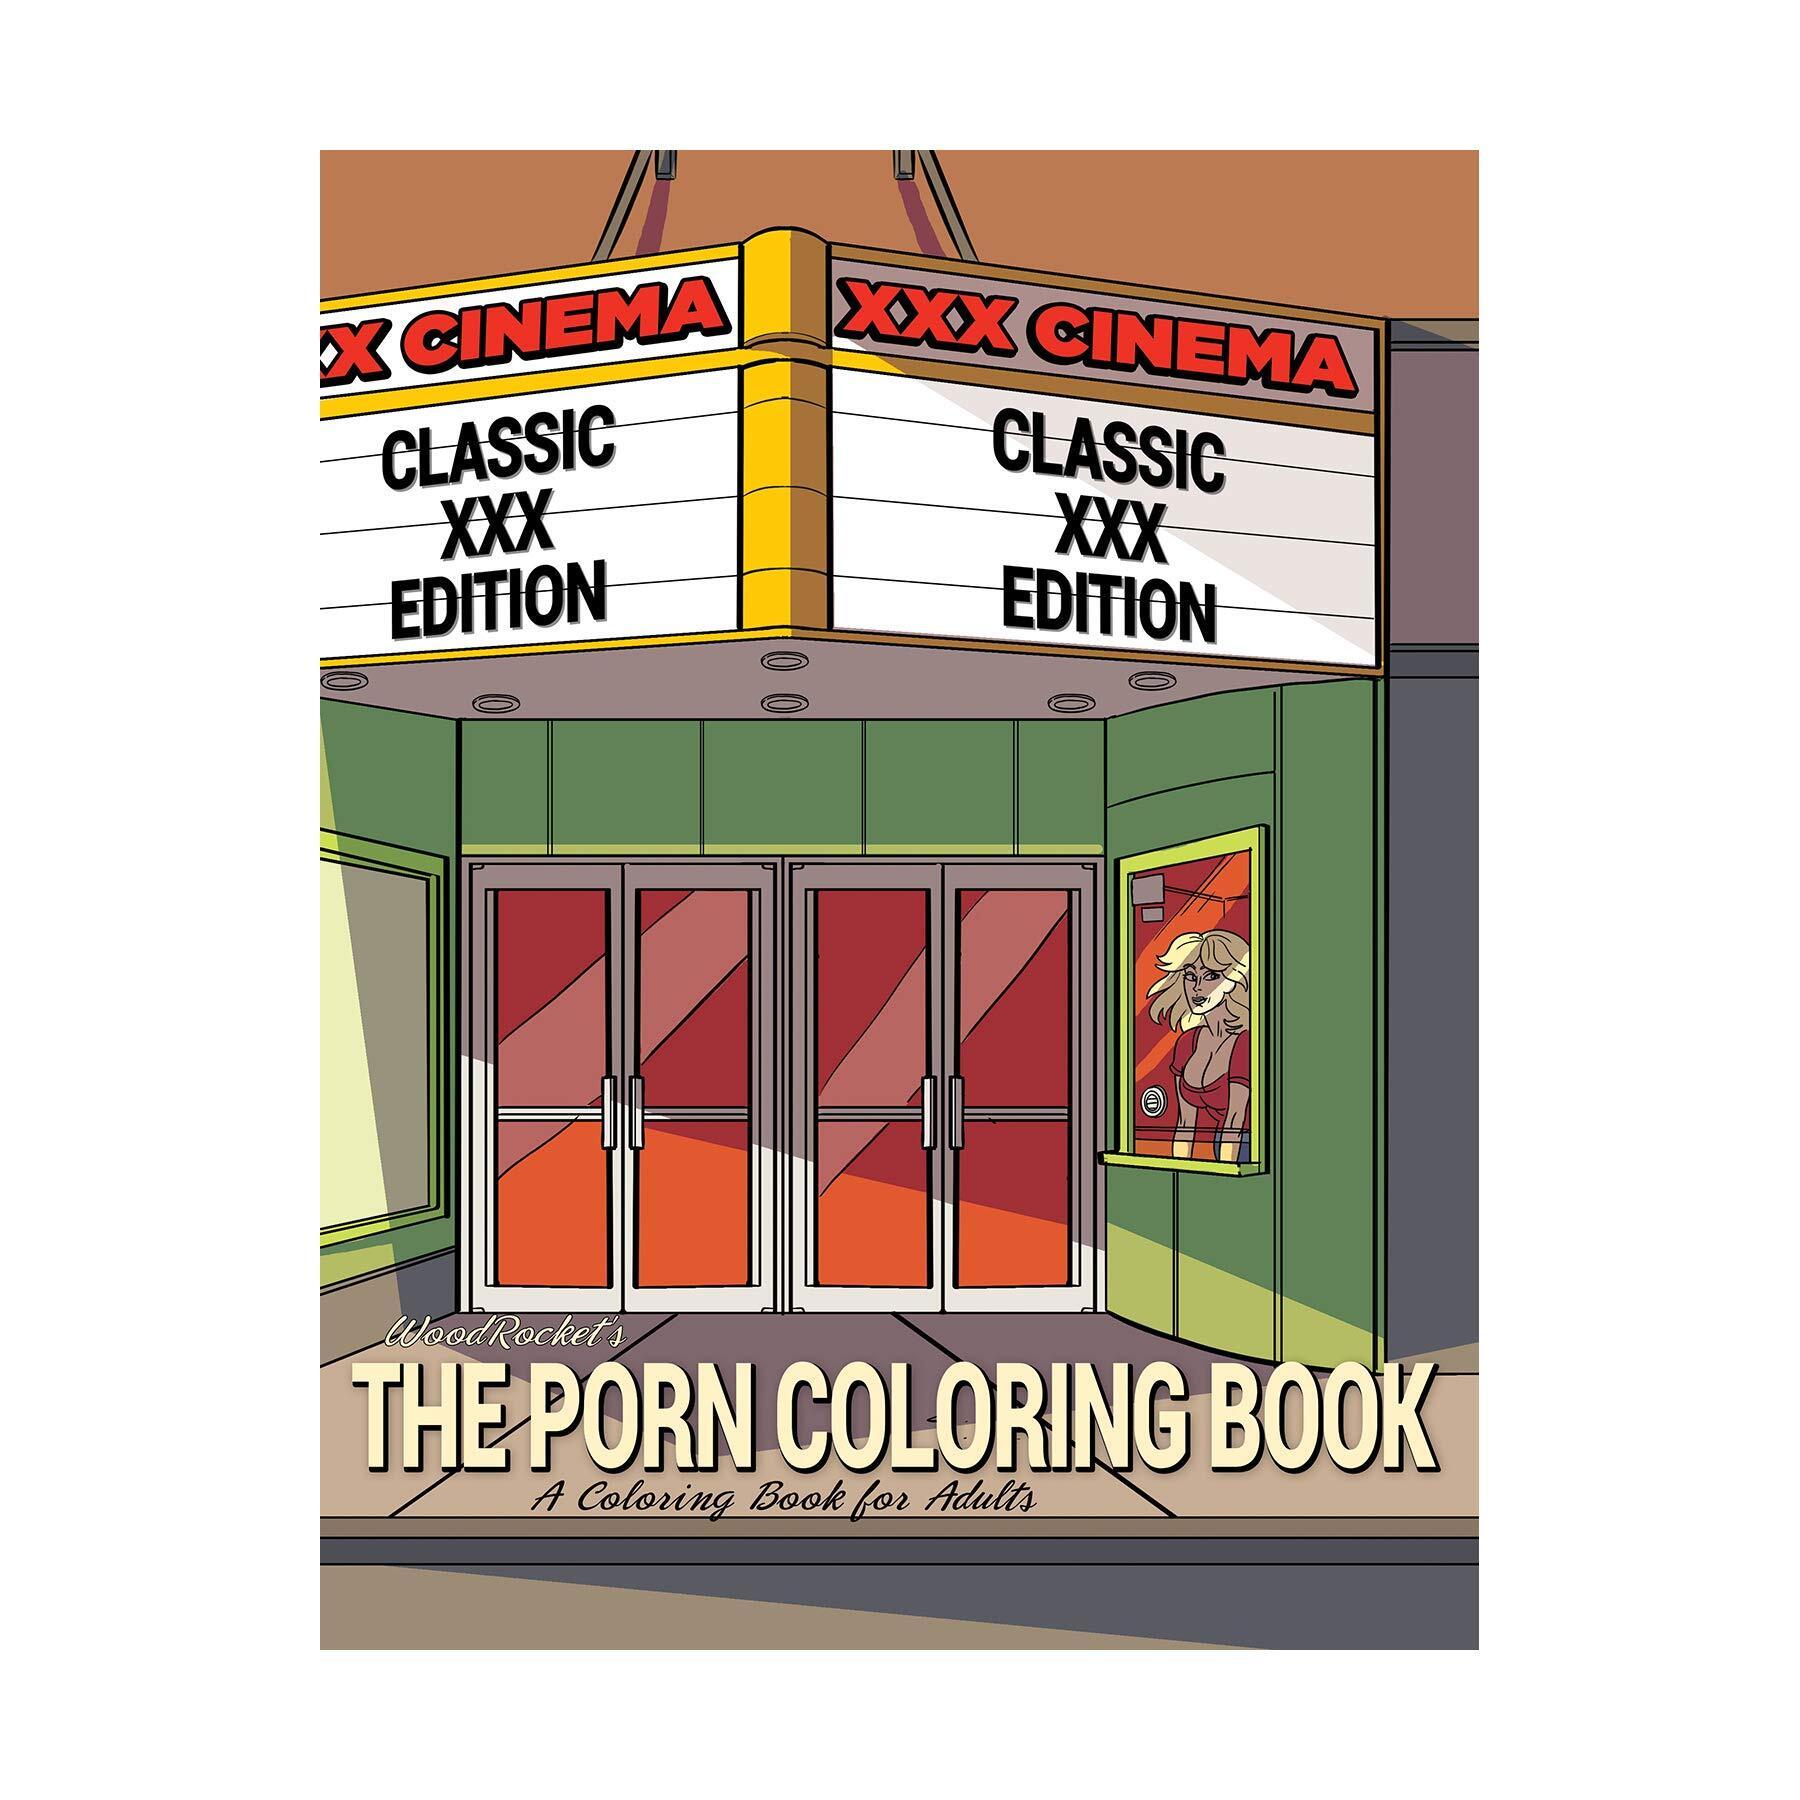 The porn coloring book classic xxx edition (net) -